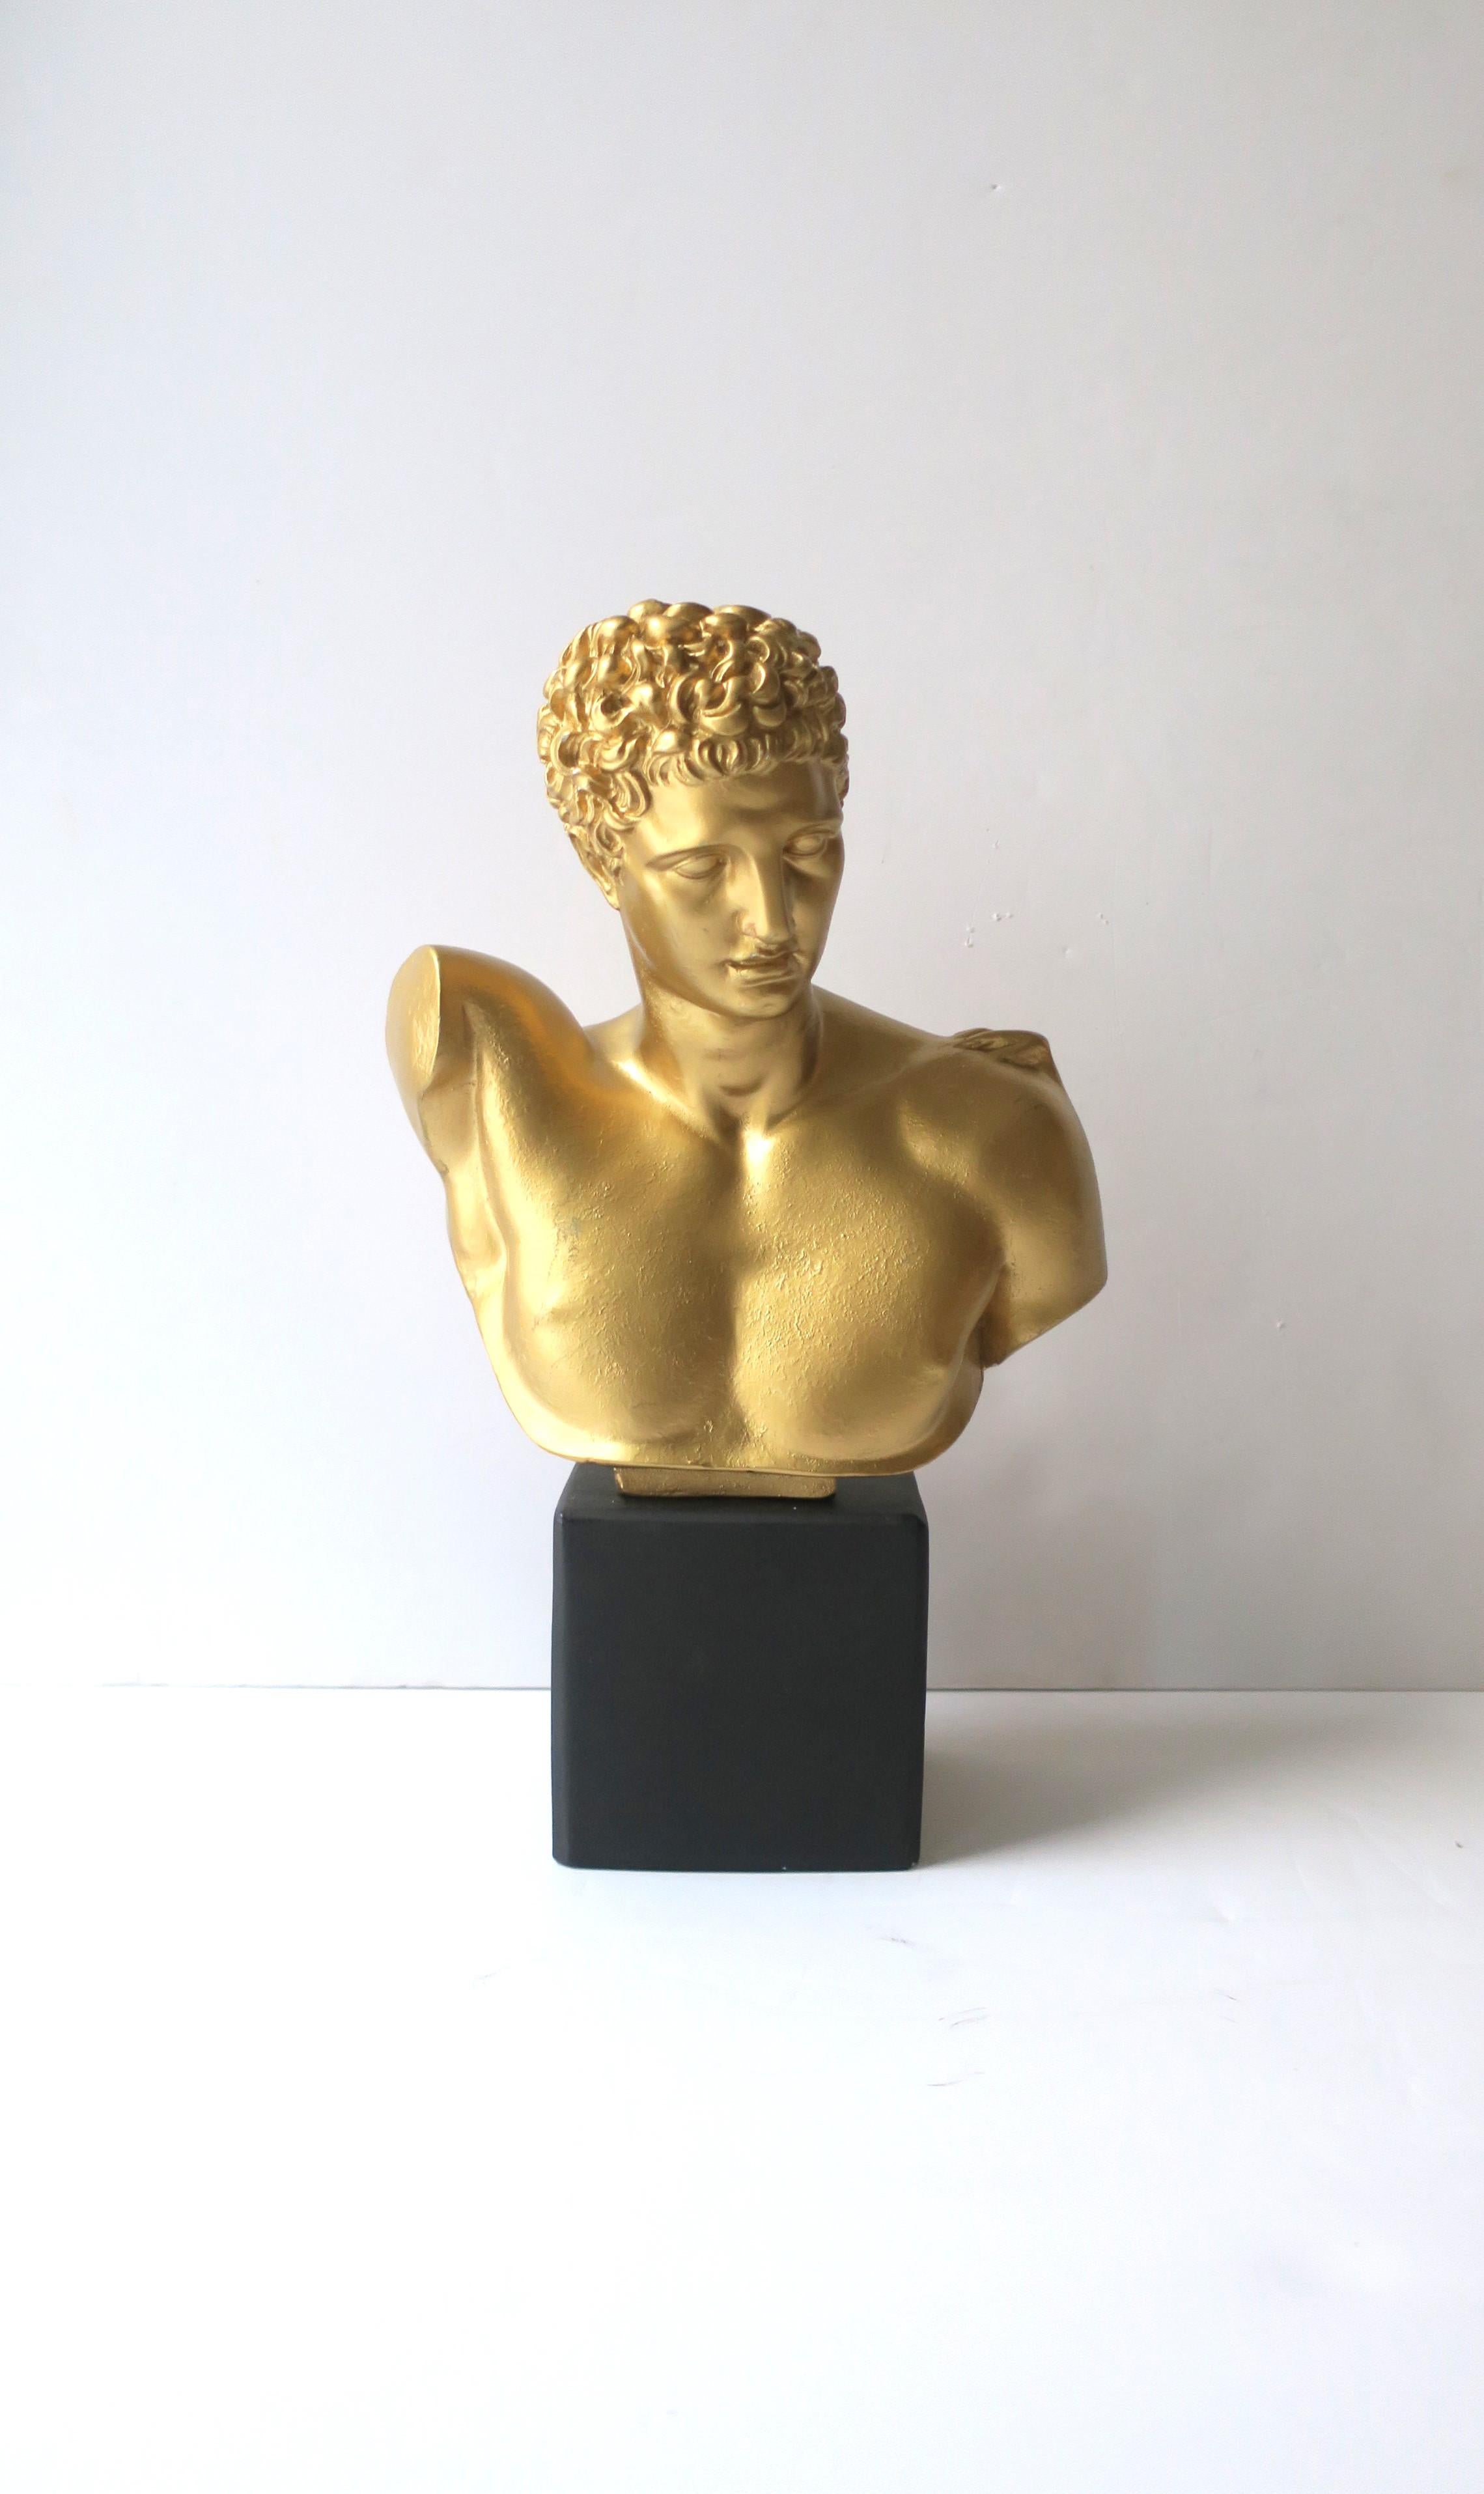 A plaster bust of ancient Greek god, Hermes. Piece is plaster with a gold overlay on bust and a matte black overlay on base. A great decorative depicting the original ancient sculpture. Dimensions: 5